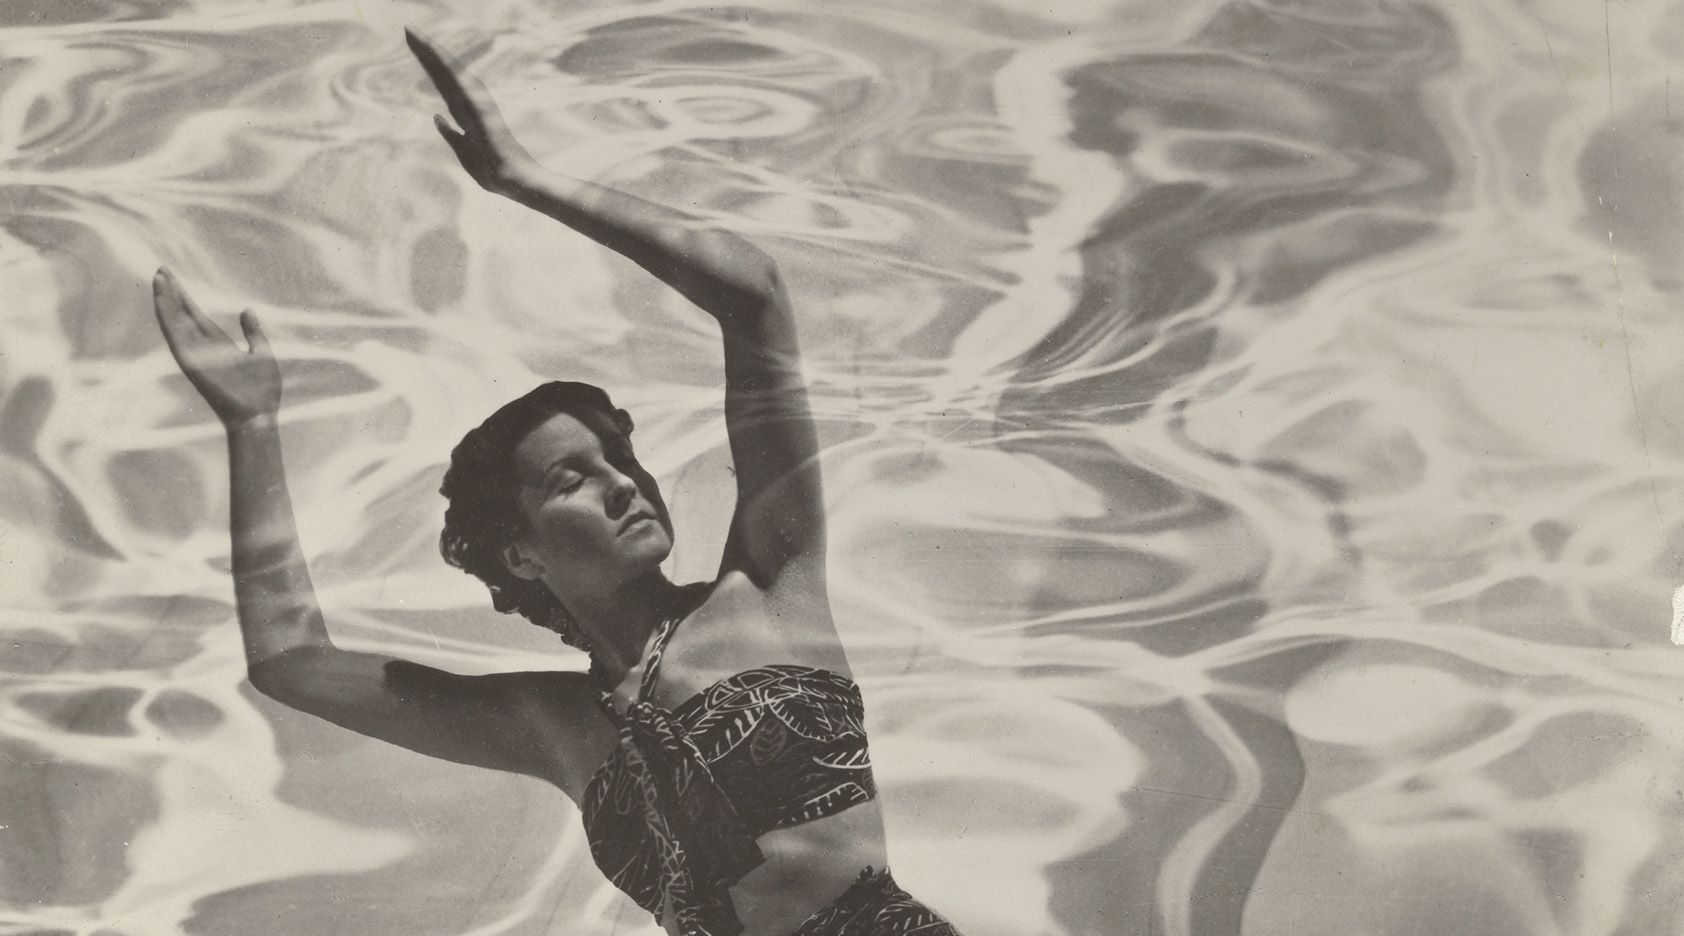 Beauty and Wisdom: current photos of American women from another era